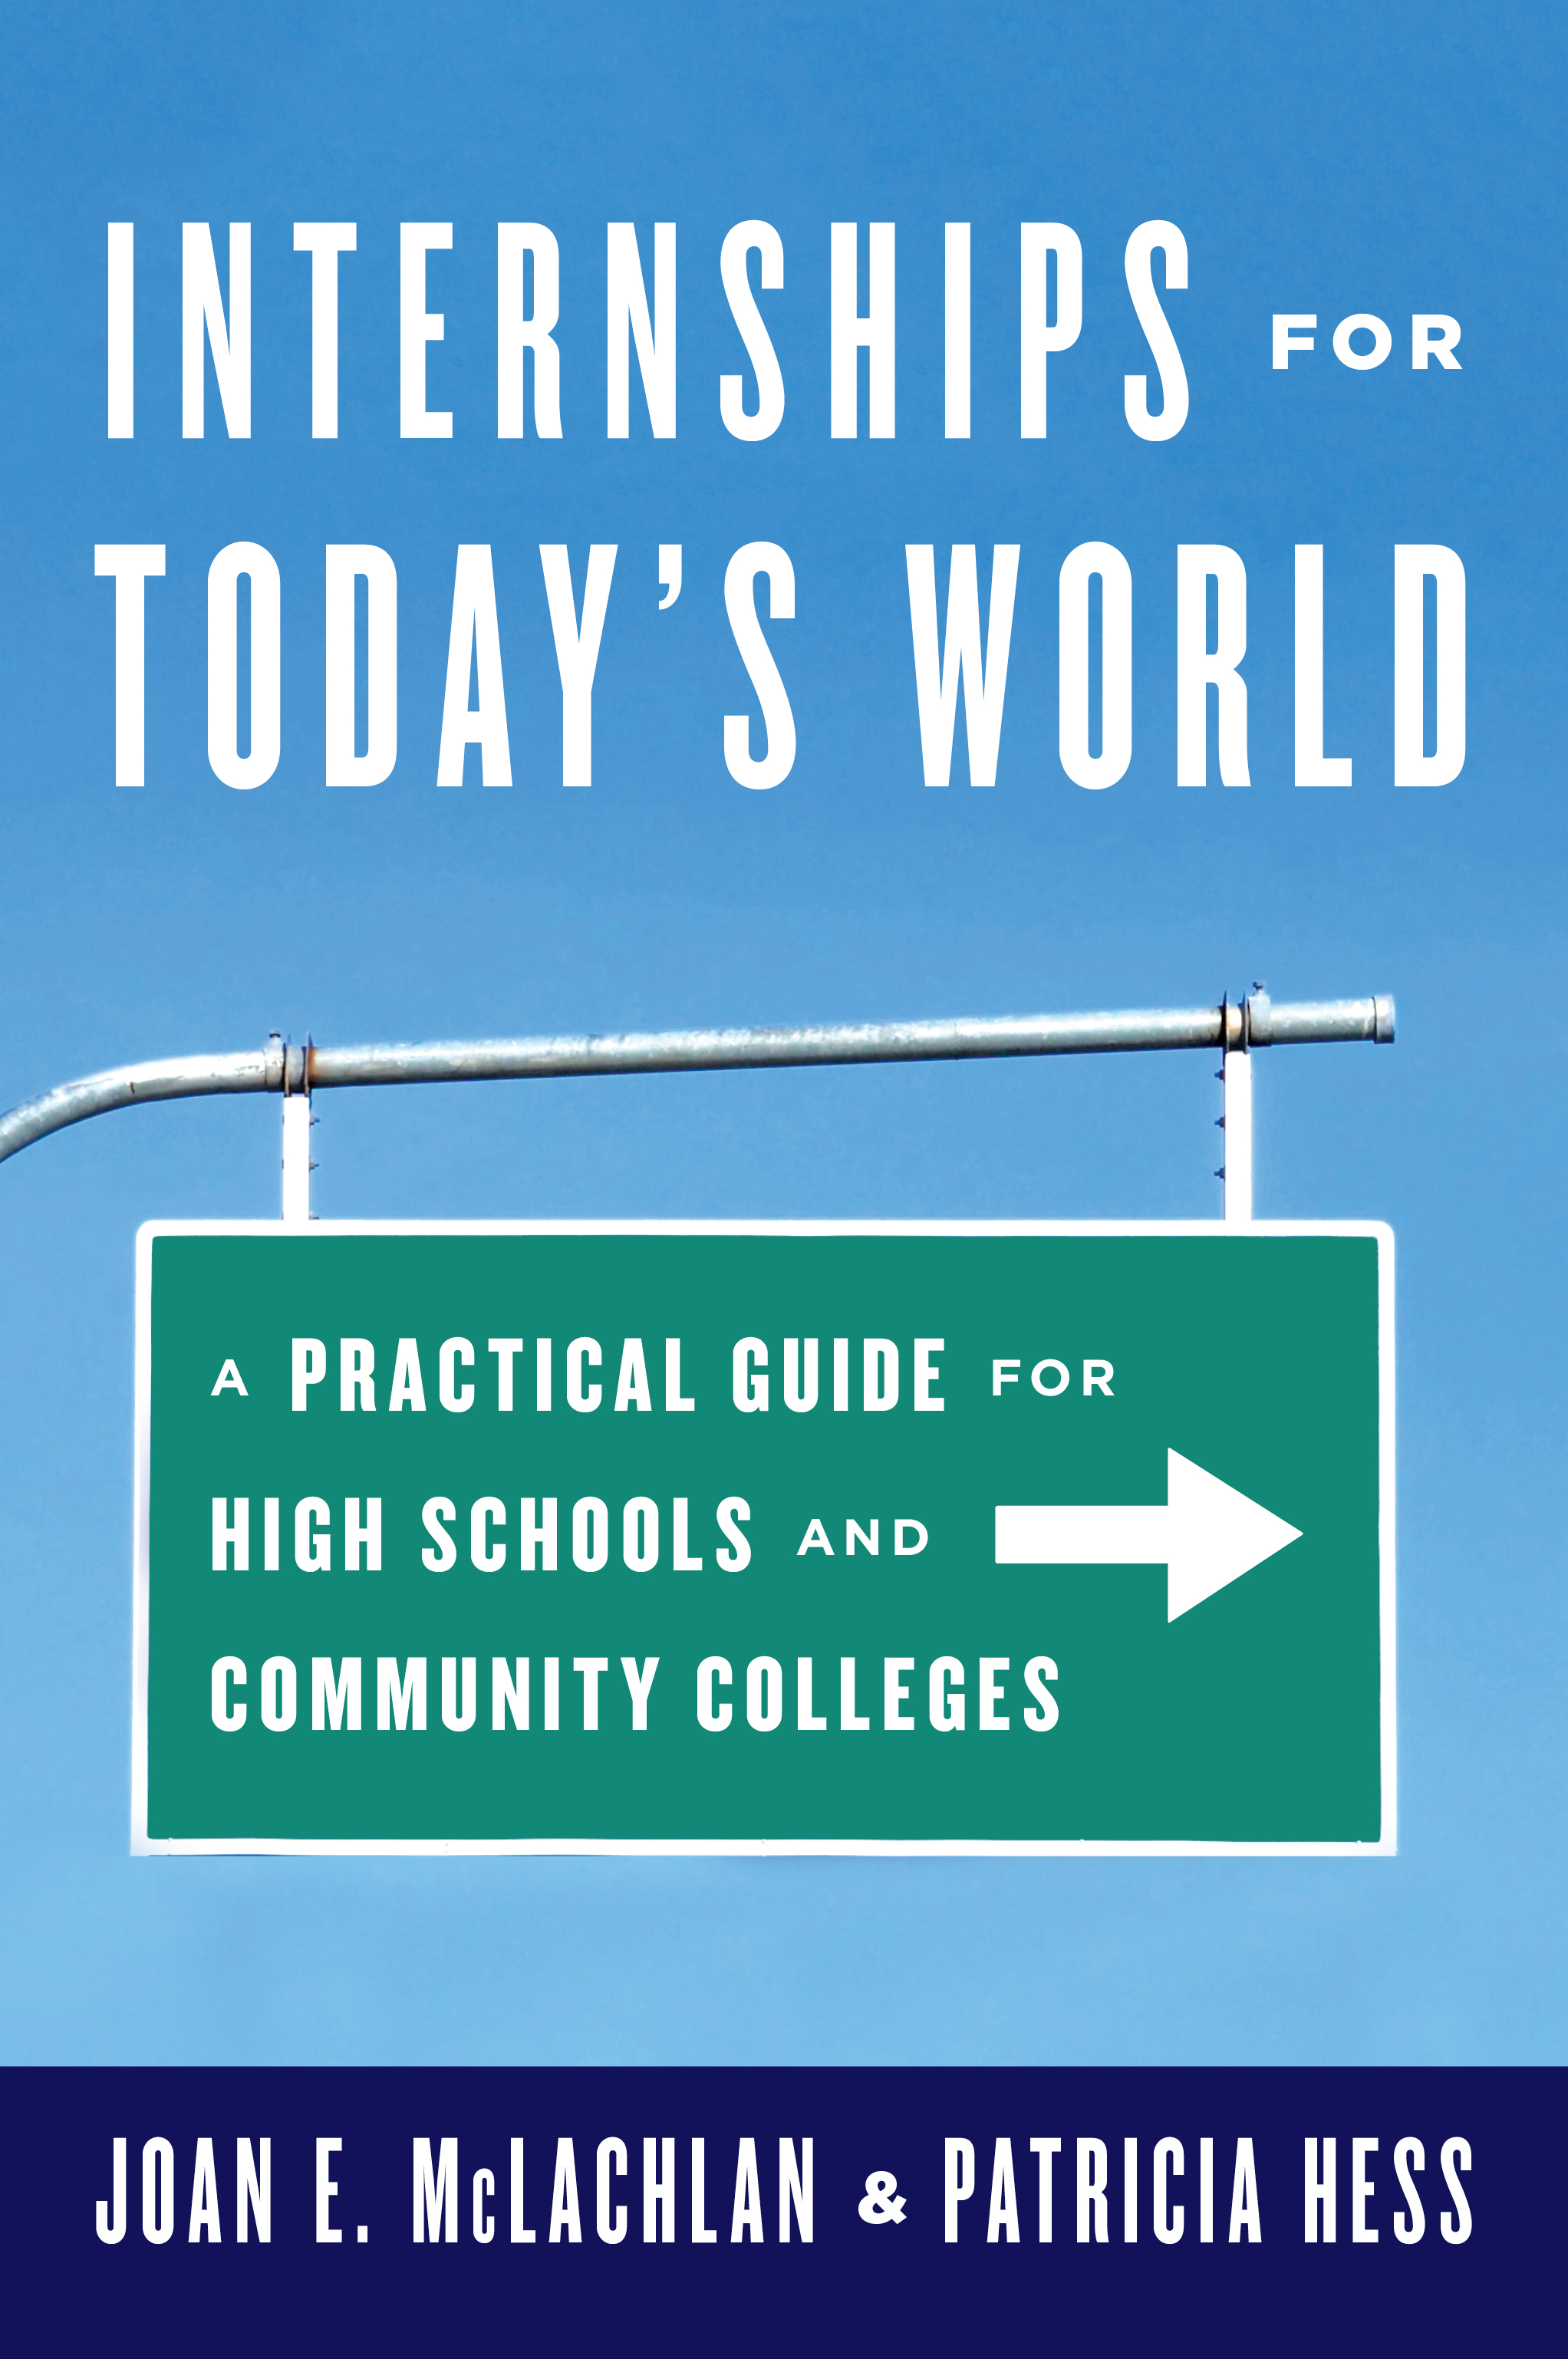 Internships for Today's World: A Practical Guide for High Schools and Community Colleges